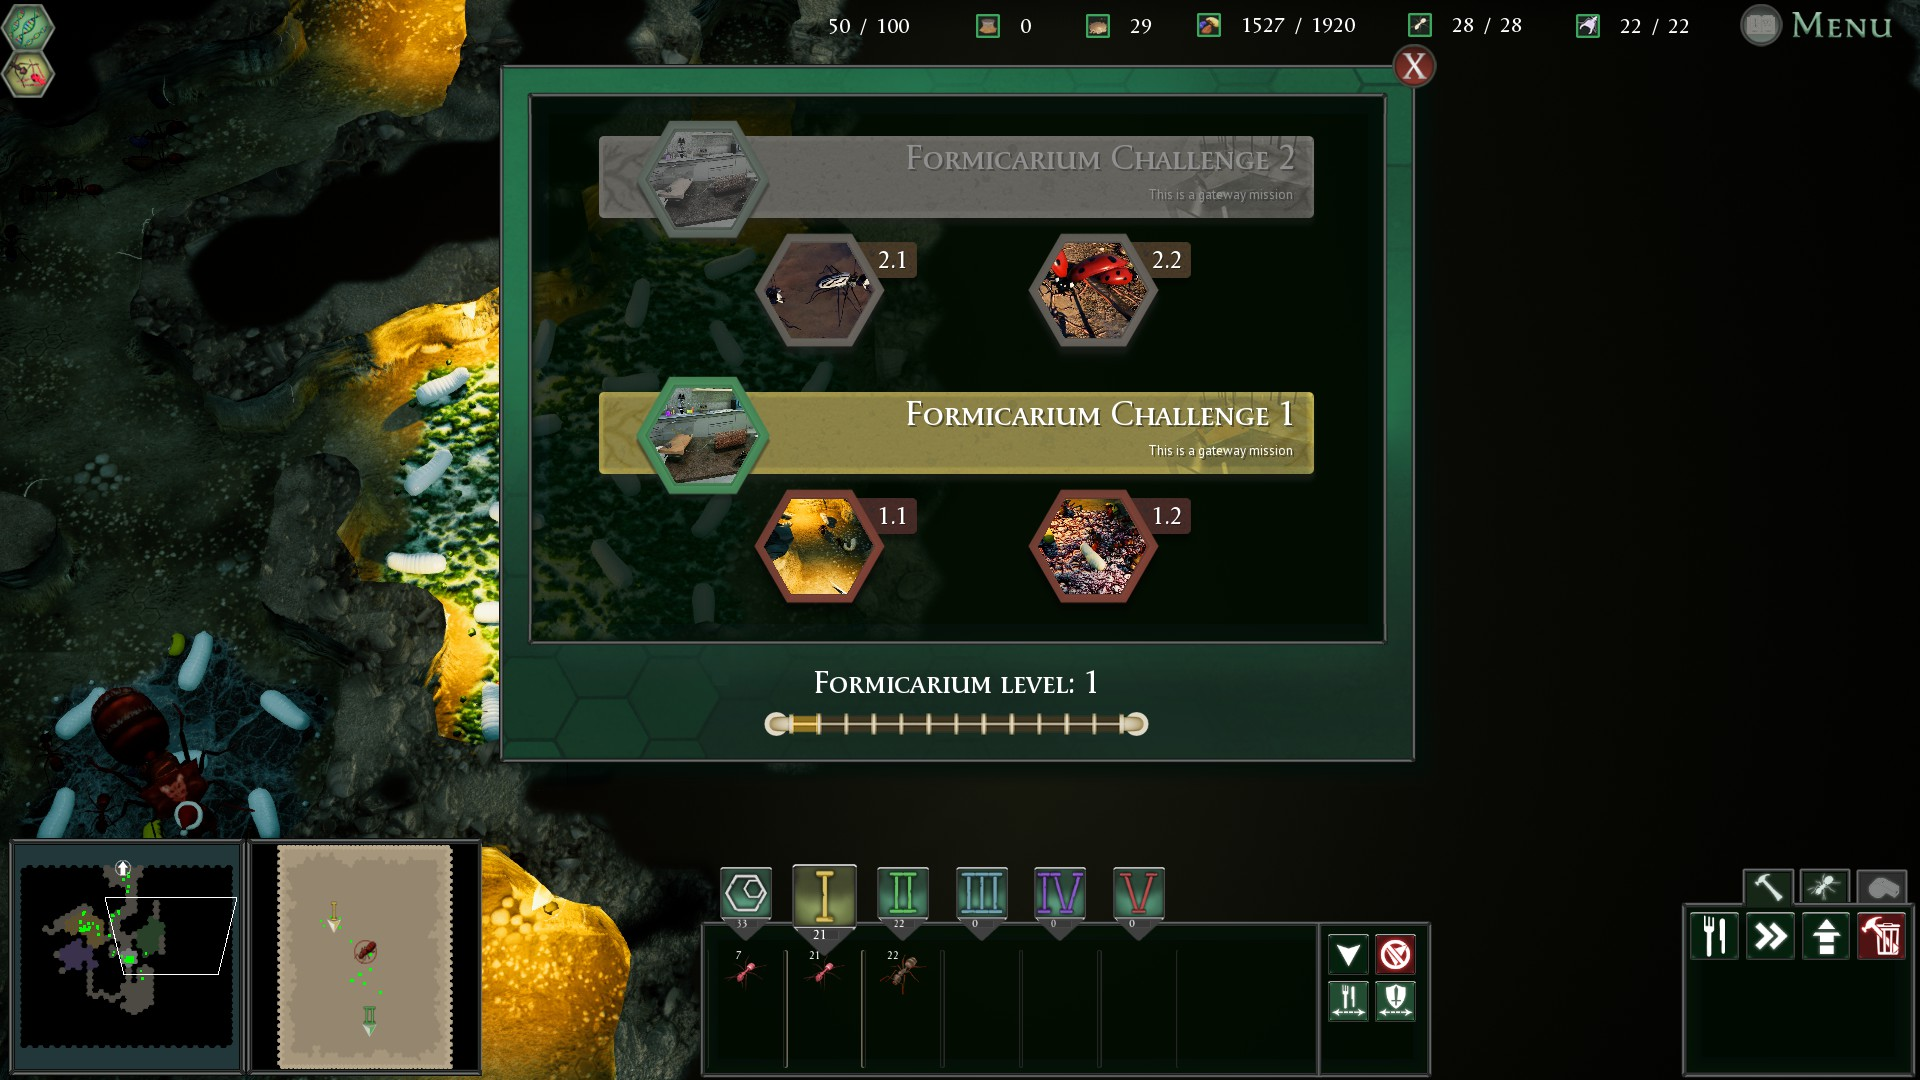 empires of the undergrowth difficulty changes for you